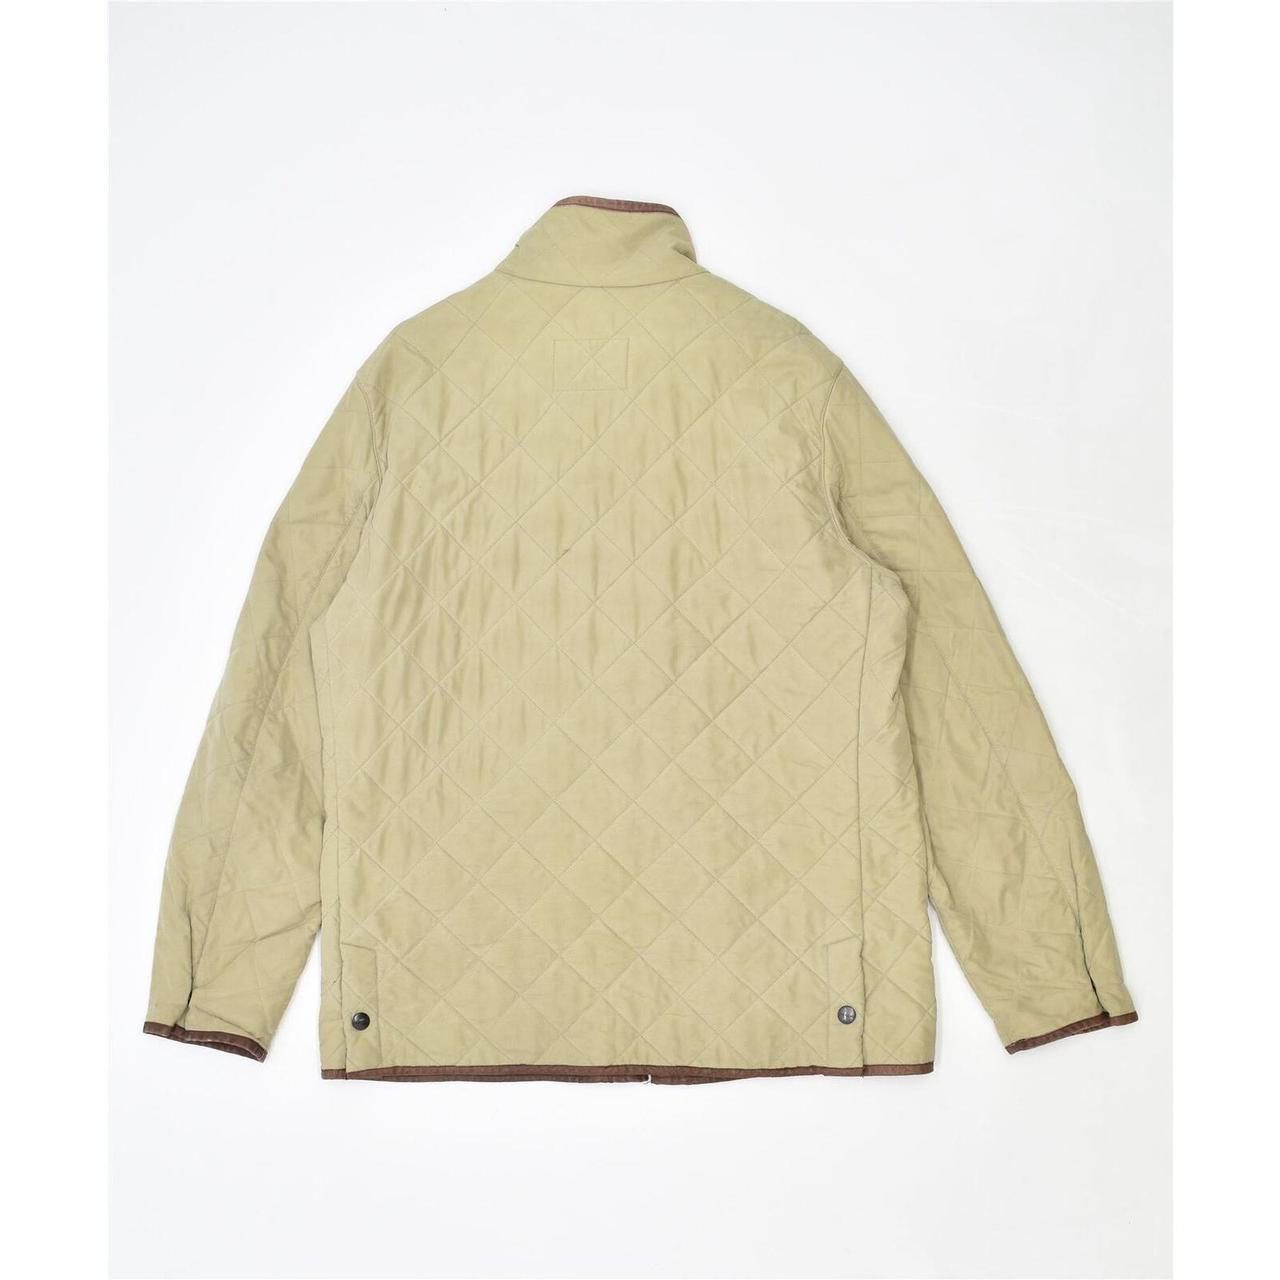 Product Image 2 - BROOKSFIELD Mens Quilted Jacket EU